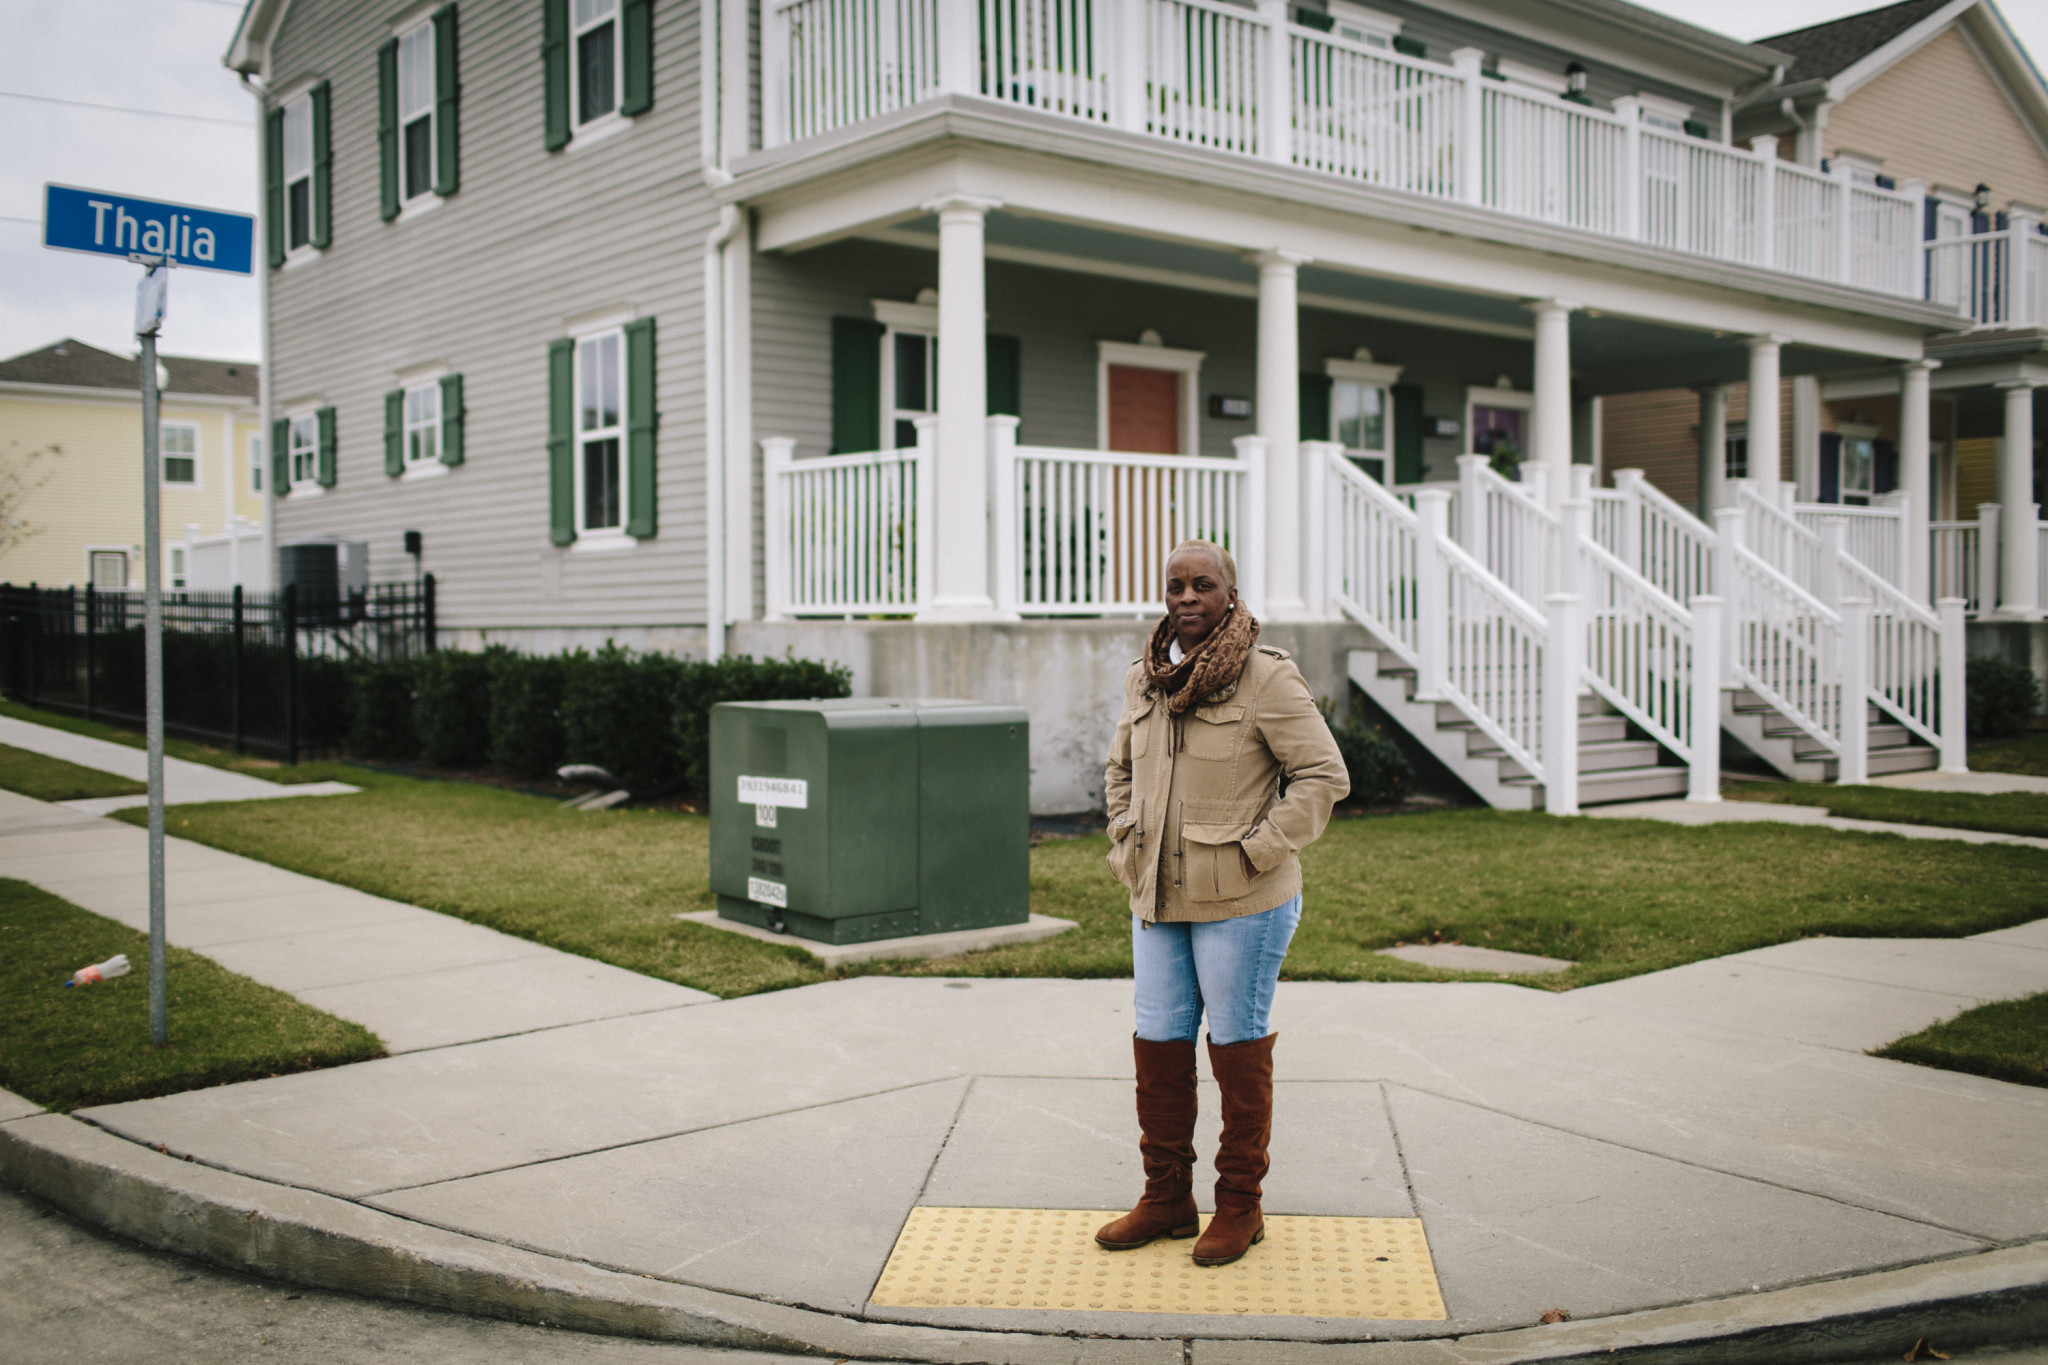 Dolfinette Martin spent years in prison on drug related charges and now works as an advocate with Vera's New Orleans pretrial services. Martin is shown standing for a portrait near where her childhood home once stood on December 3, 2015 in New Orleans.